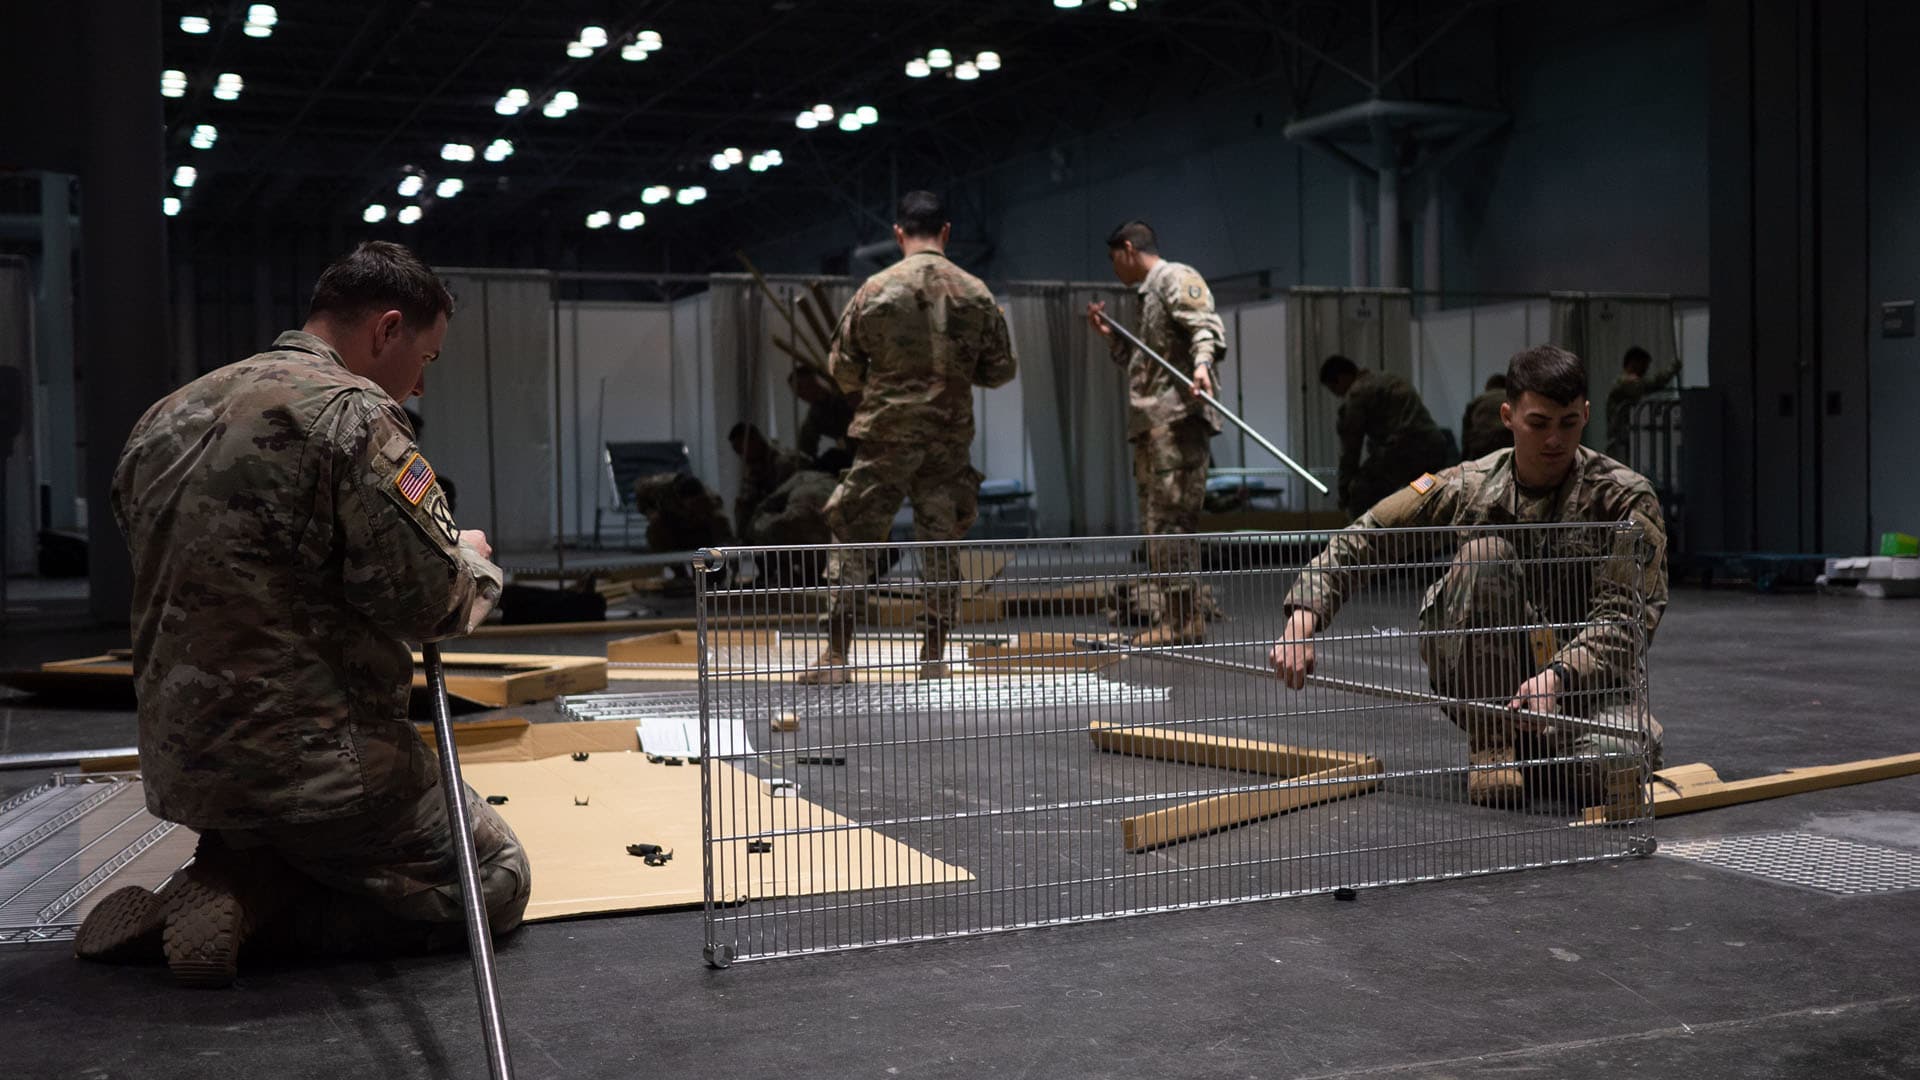 Soldiers assigned to the 531st Hospital Center build shelving at the Jacob K. Javits Convention Center in Manhattan, where a temporary medical station has been constructed to aid efforts combating the Covid-19 pandemic.